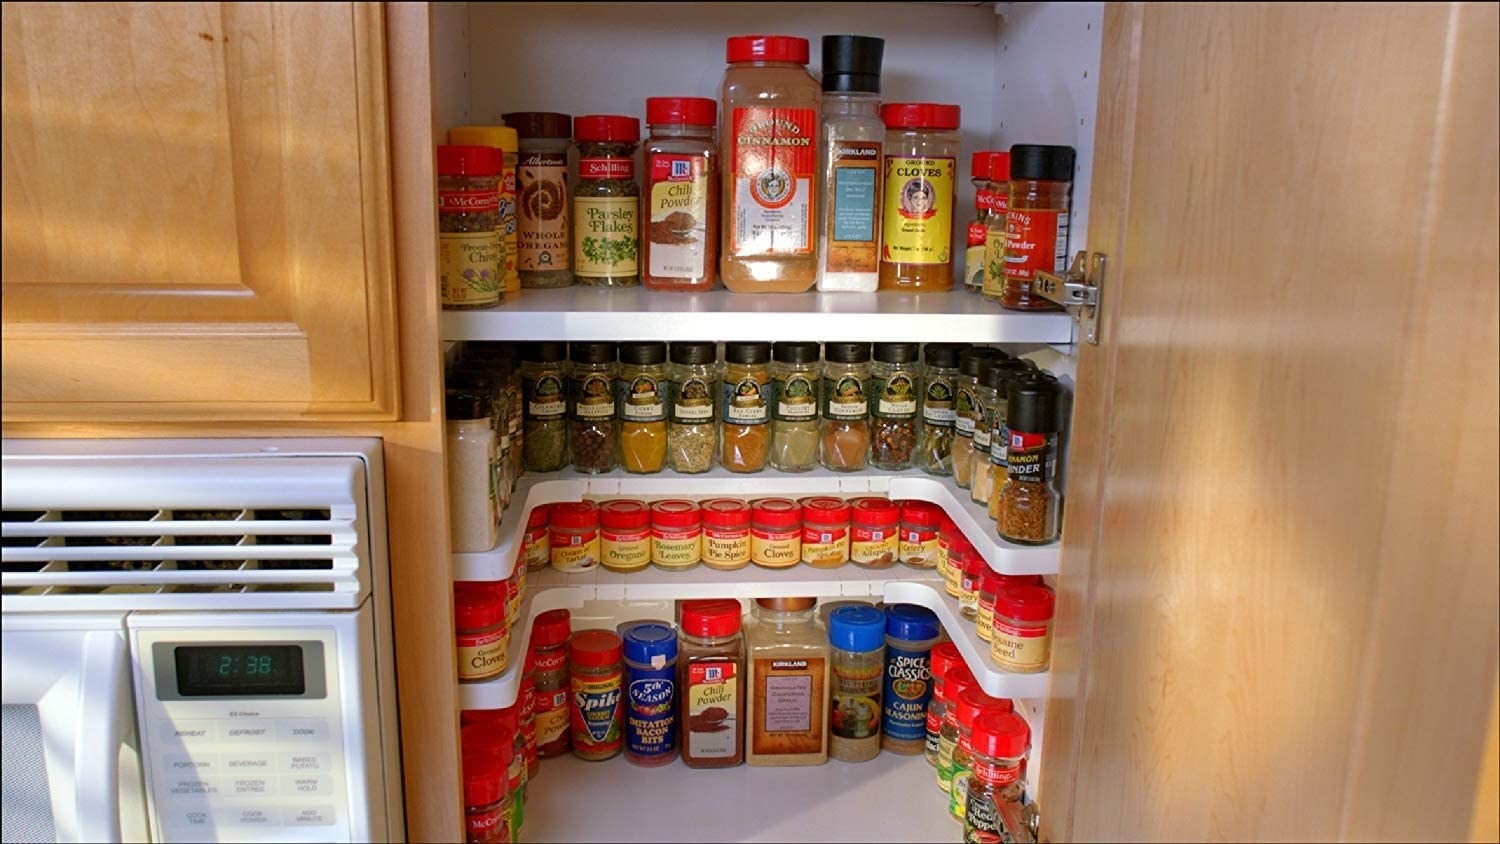 The multi-level shelf filled with spices